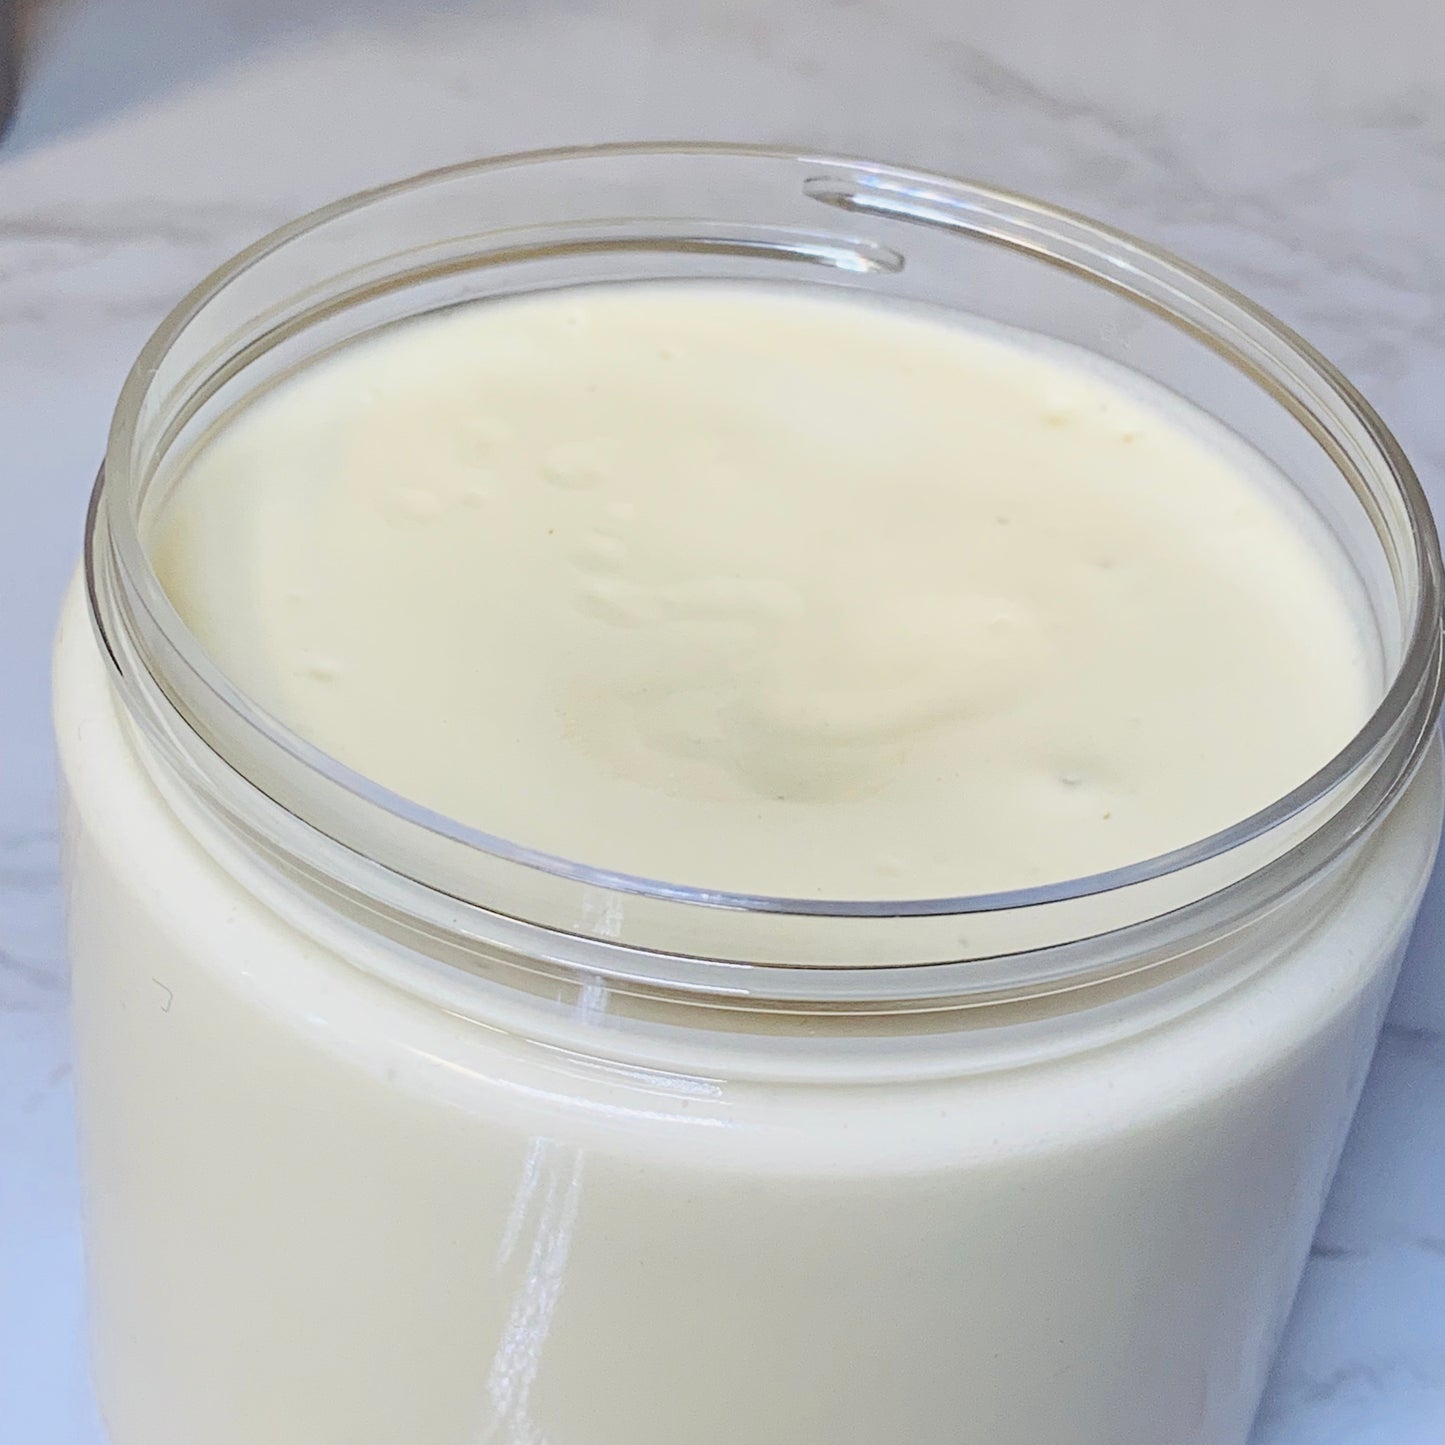 Strawberry Scented Enriched Shea Butter In A Butter Jar,Skin Glow Butter